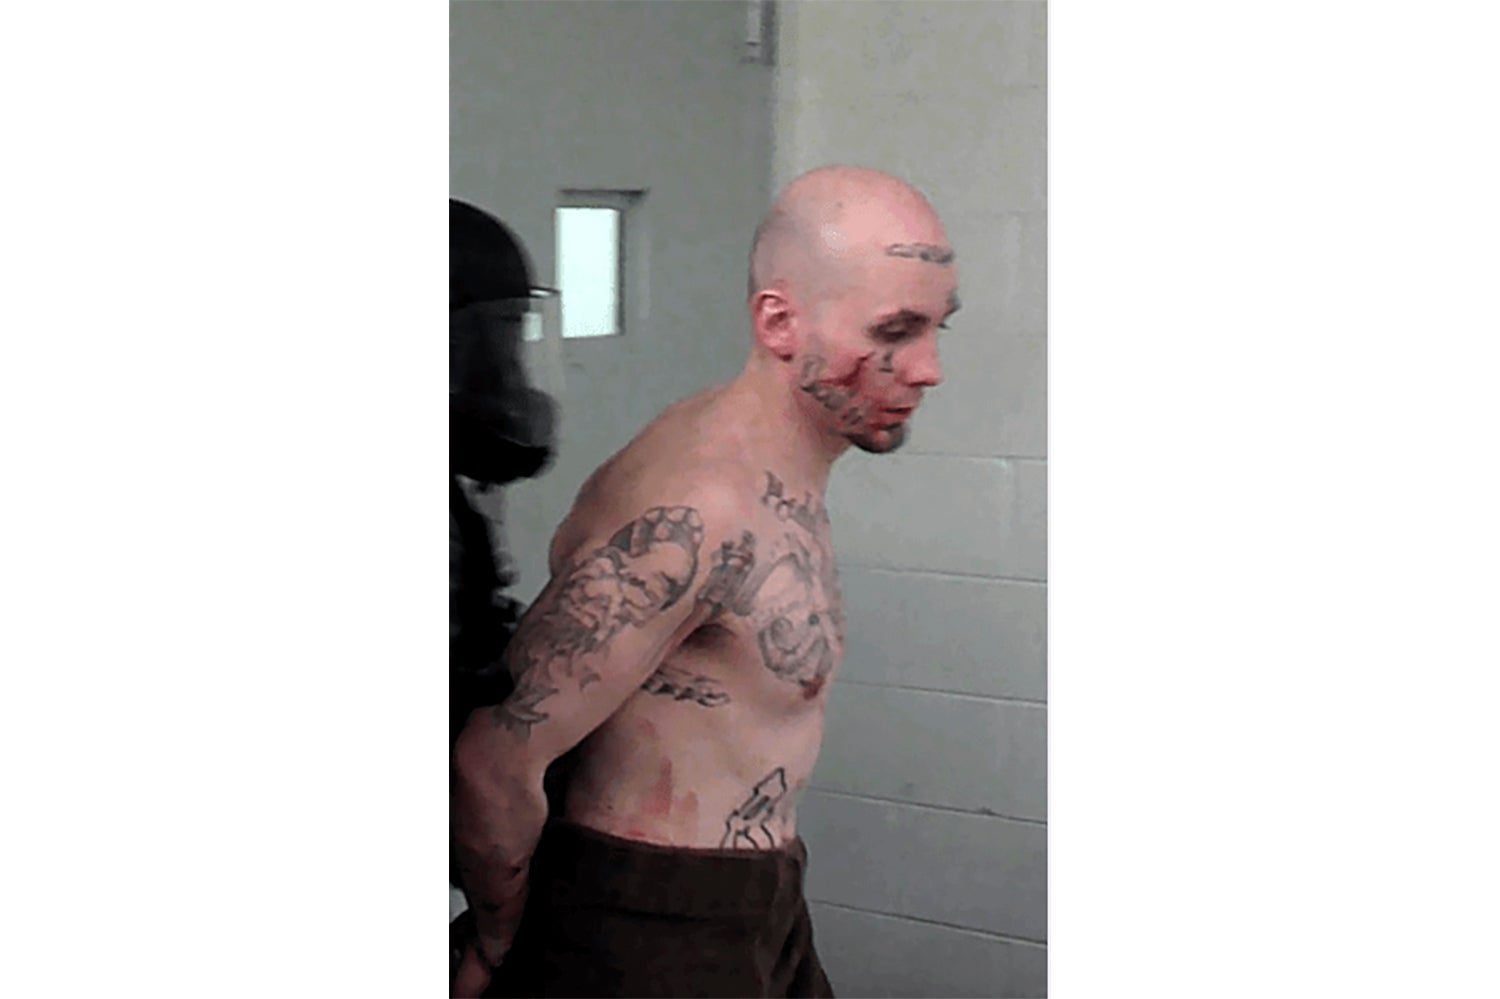 Image of Skylar Meade released by Boise Police following his escape from custody